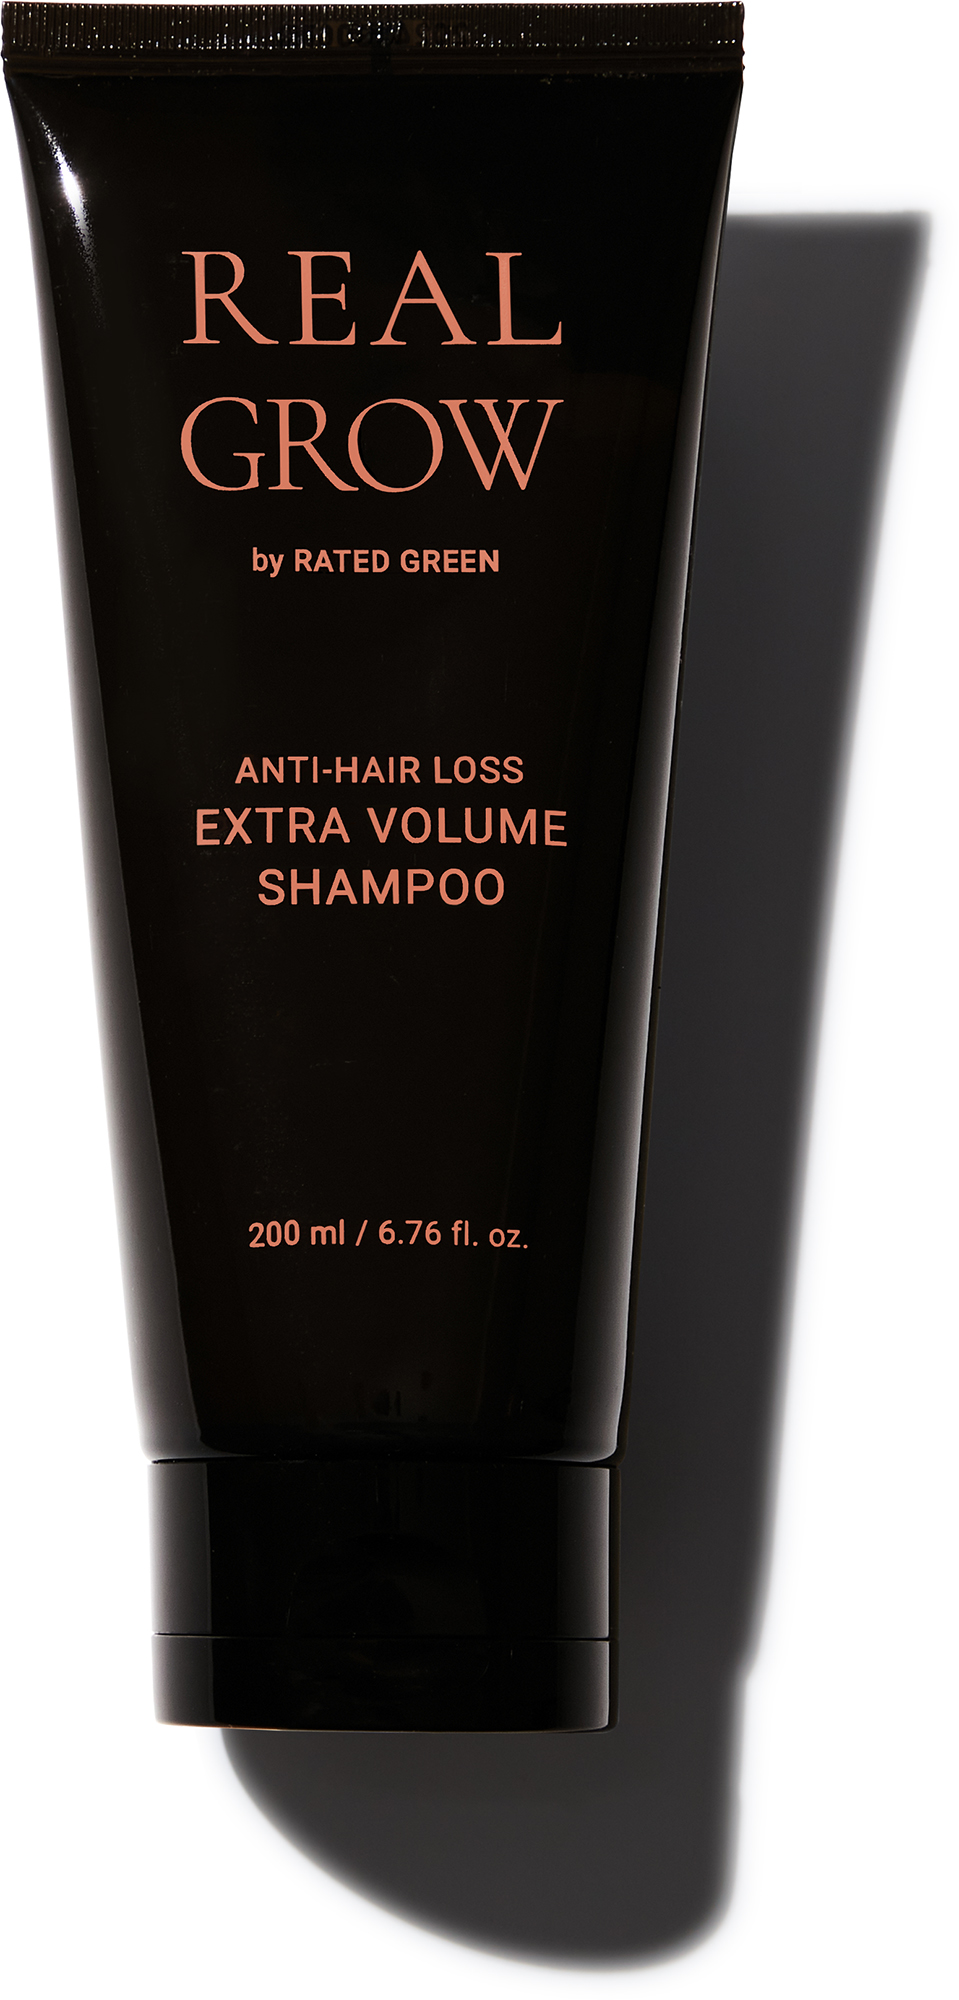 https://lyko.com/globalassets/product-images/rated-green-real-green-real-grow-anti--hair-loss-extra-volume-shapoo-200ml-3331-115-0200_1.jpg?ref=AC3EED3963